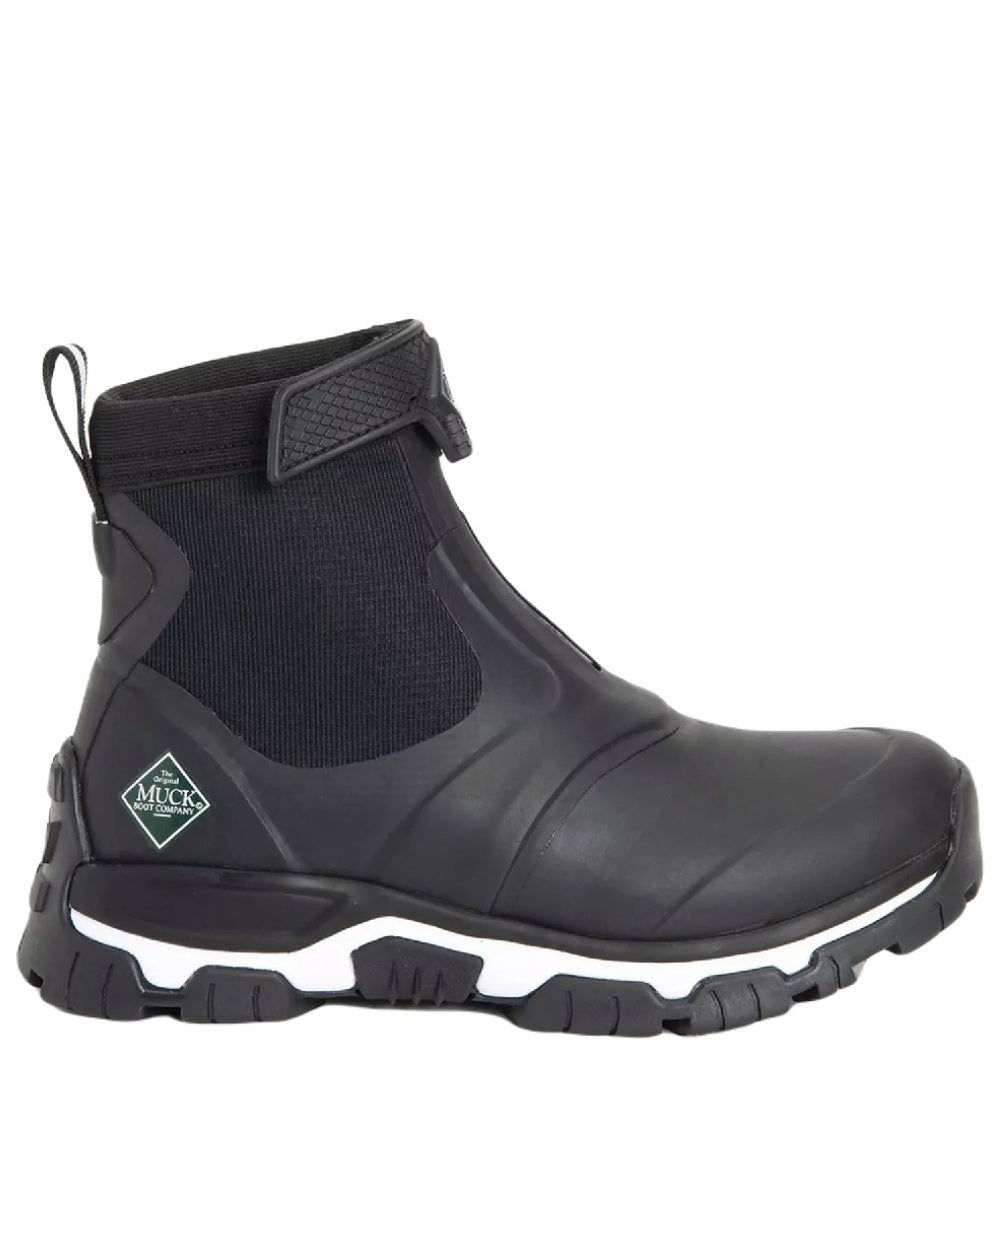 Black Coloured Muck Boots Ladies Apex Zip Mid Boots On A White Background 